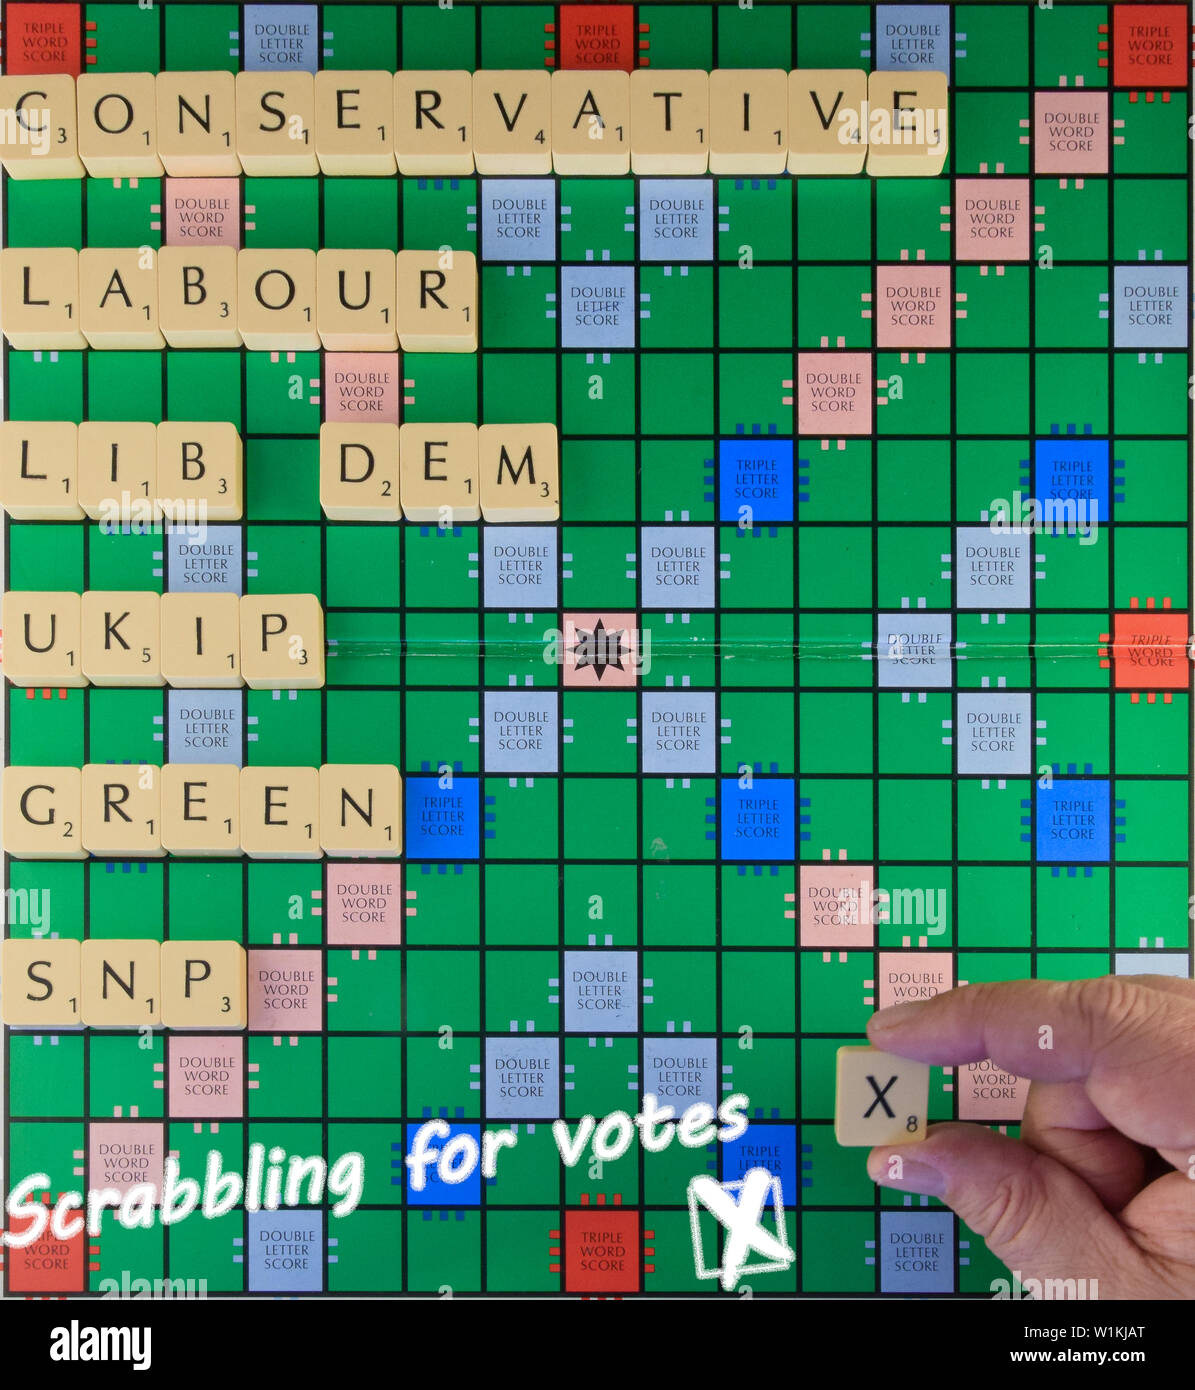 Reading, United Kingdom - May 02 2015:   An image illustrating the voting decision in a UK election using the Mattel game Scrabble Stock Photo